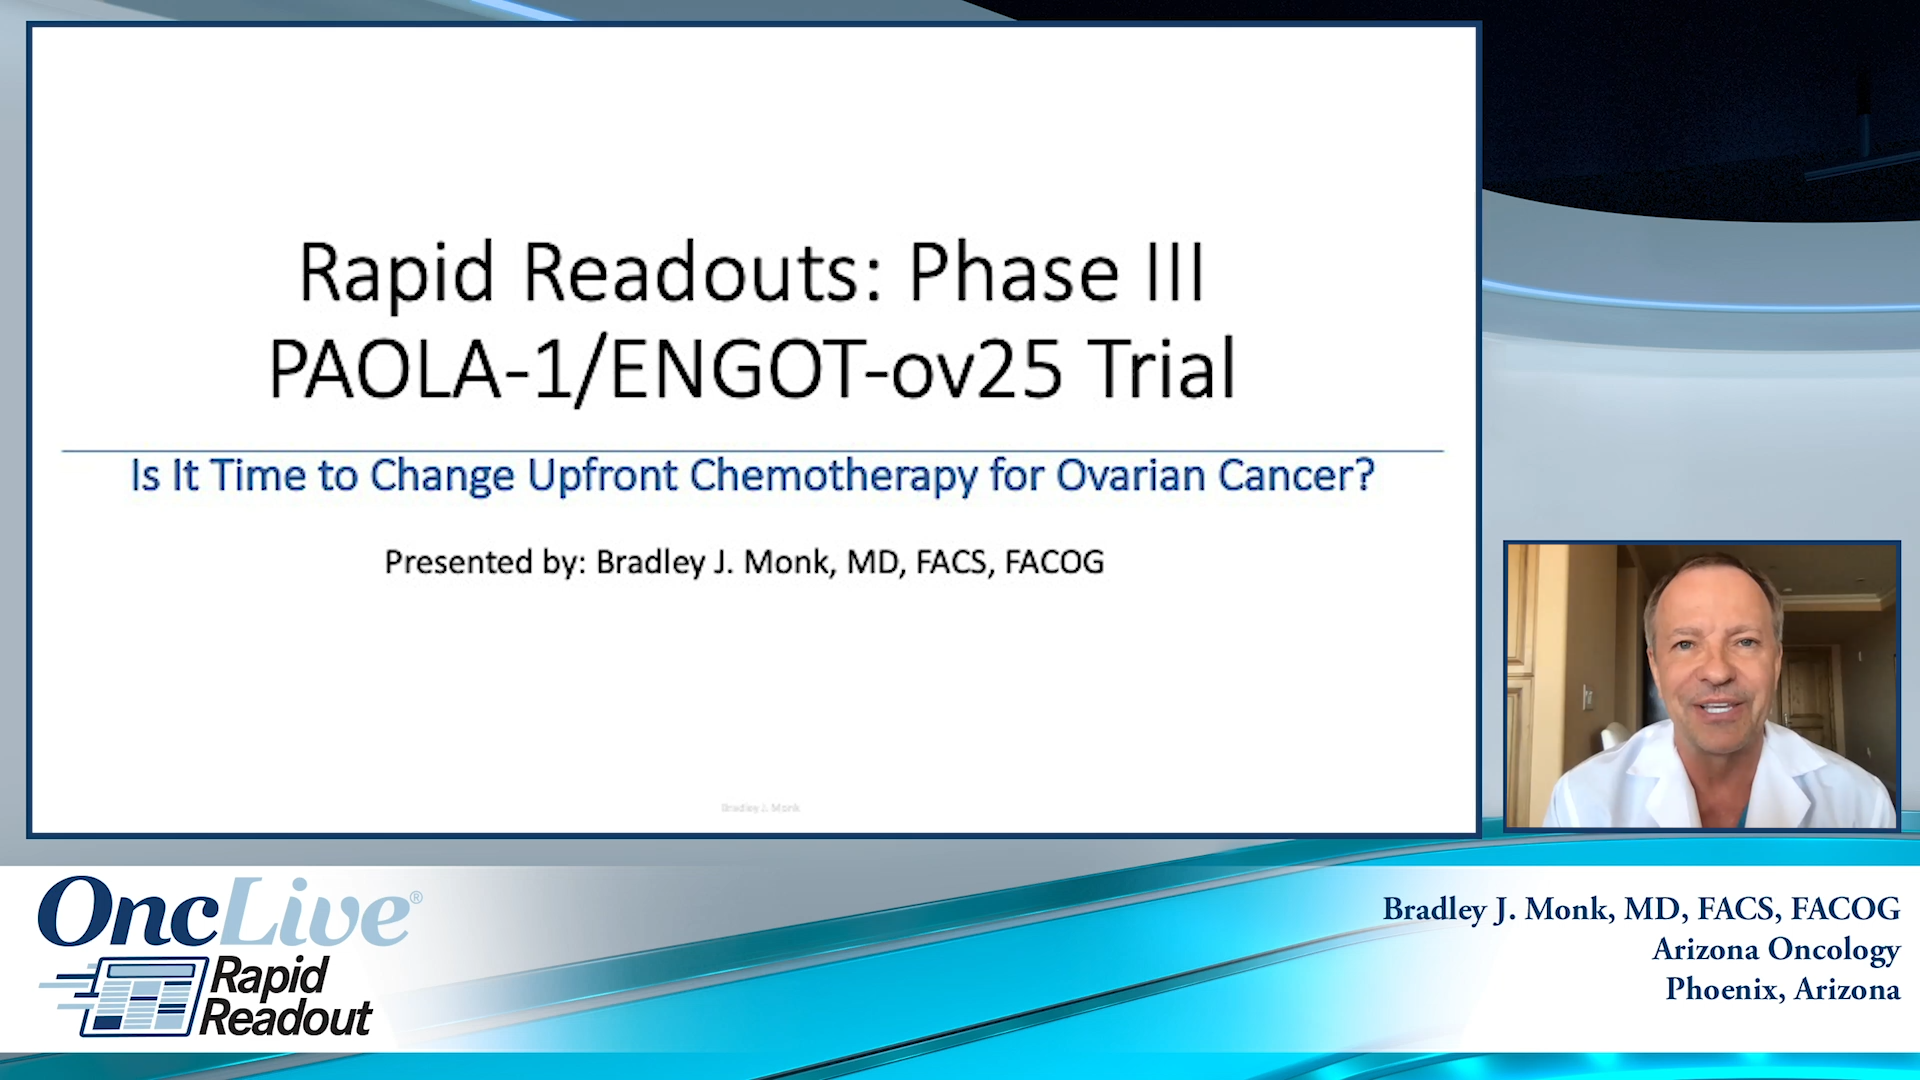 Rapid Readouts: Phase III PAOLA-1/ENGOT-ov25 Trial